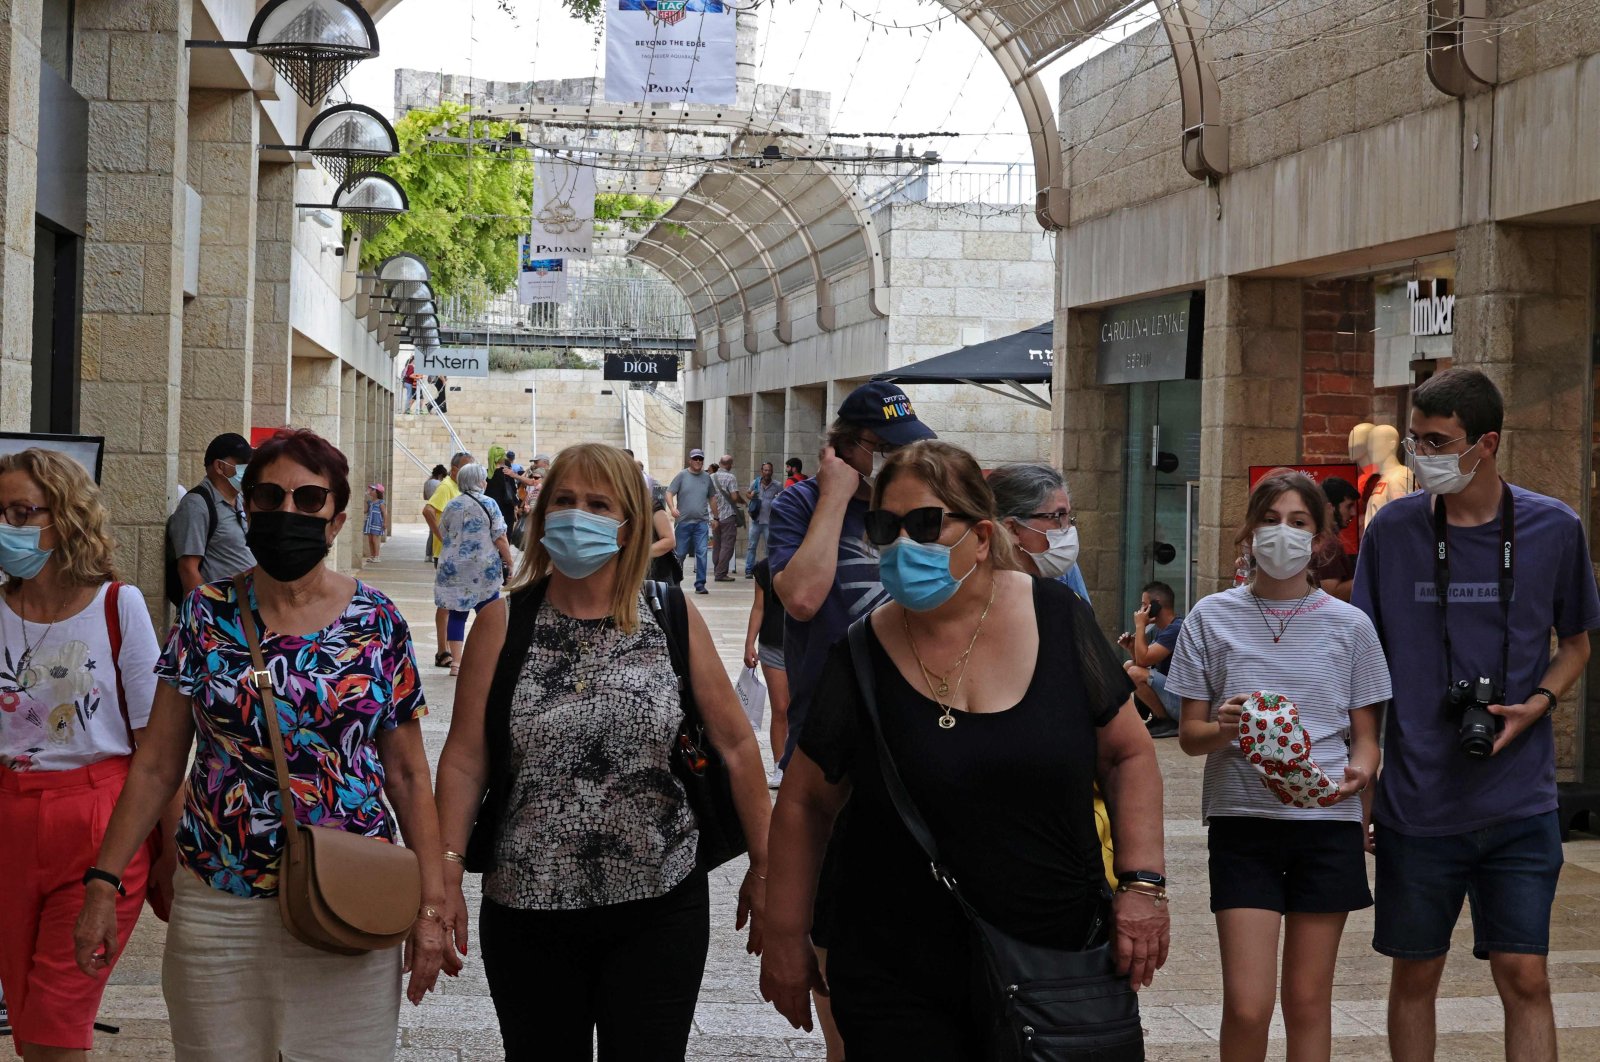 People wear masks against the coronavirus as they walk at a market in Jerusalem, Israel, Aug. 11, 2021. (AFP Photo)